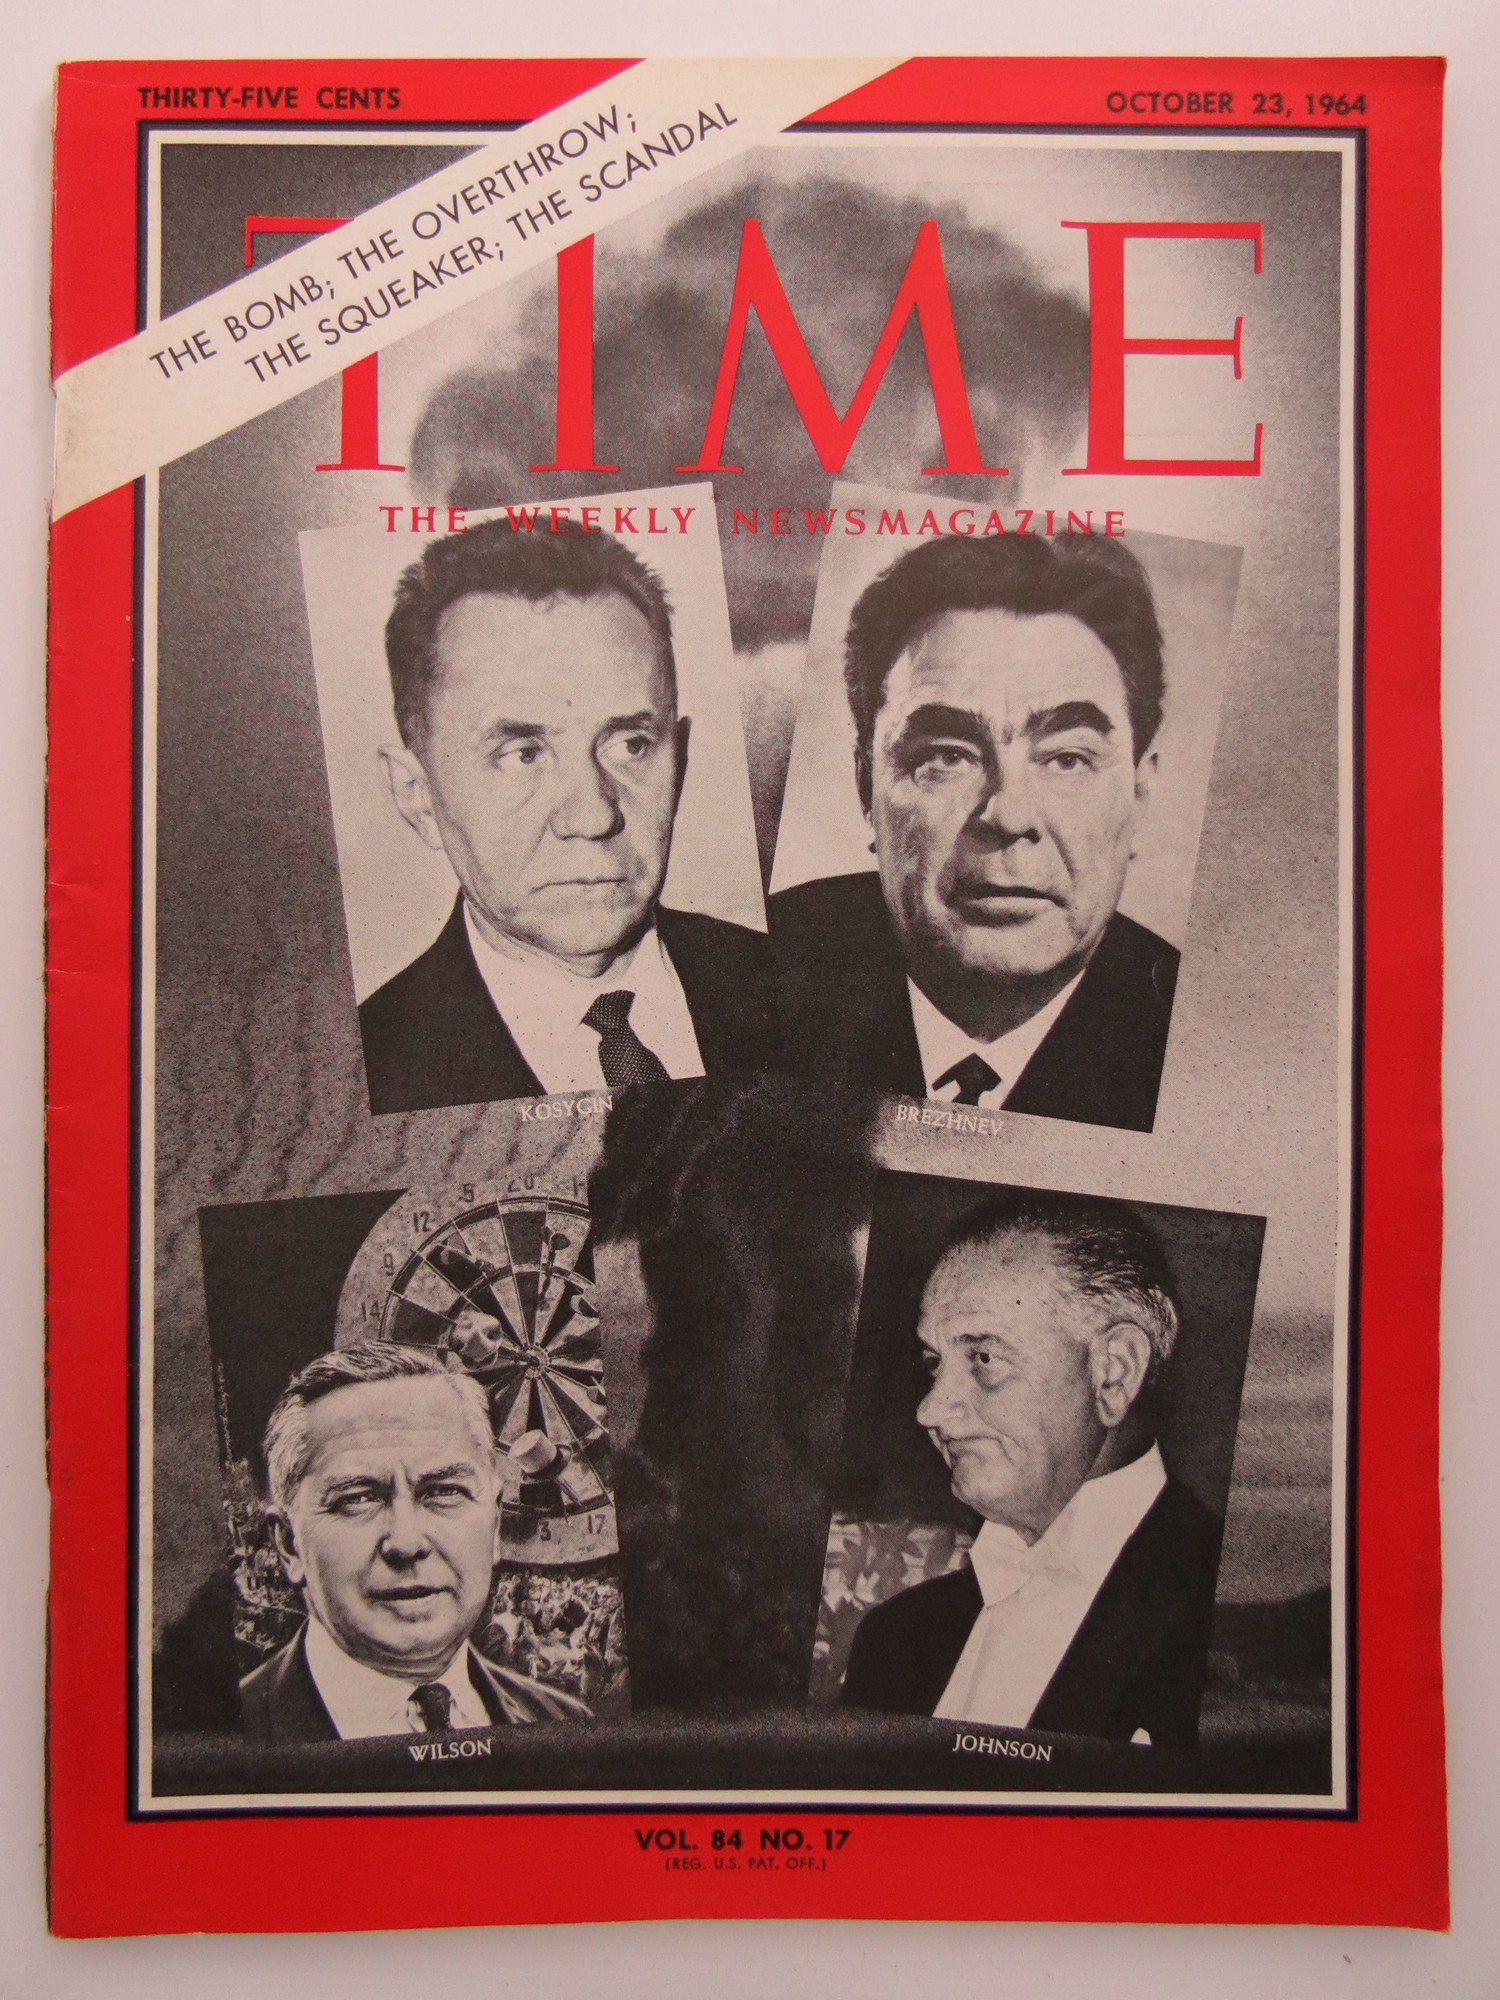 TIME MAGAZINE OCTOBER 23, 1964 (THE BOMB; THE OVERTHROW; THE SQEAKER ...